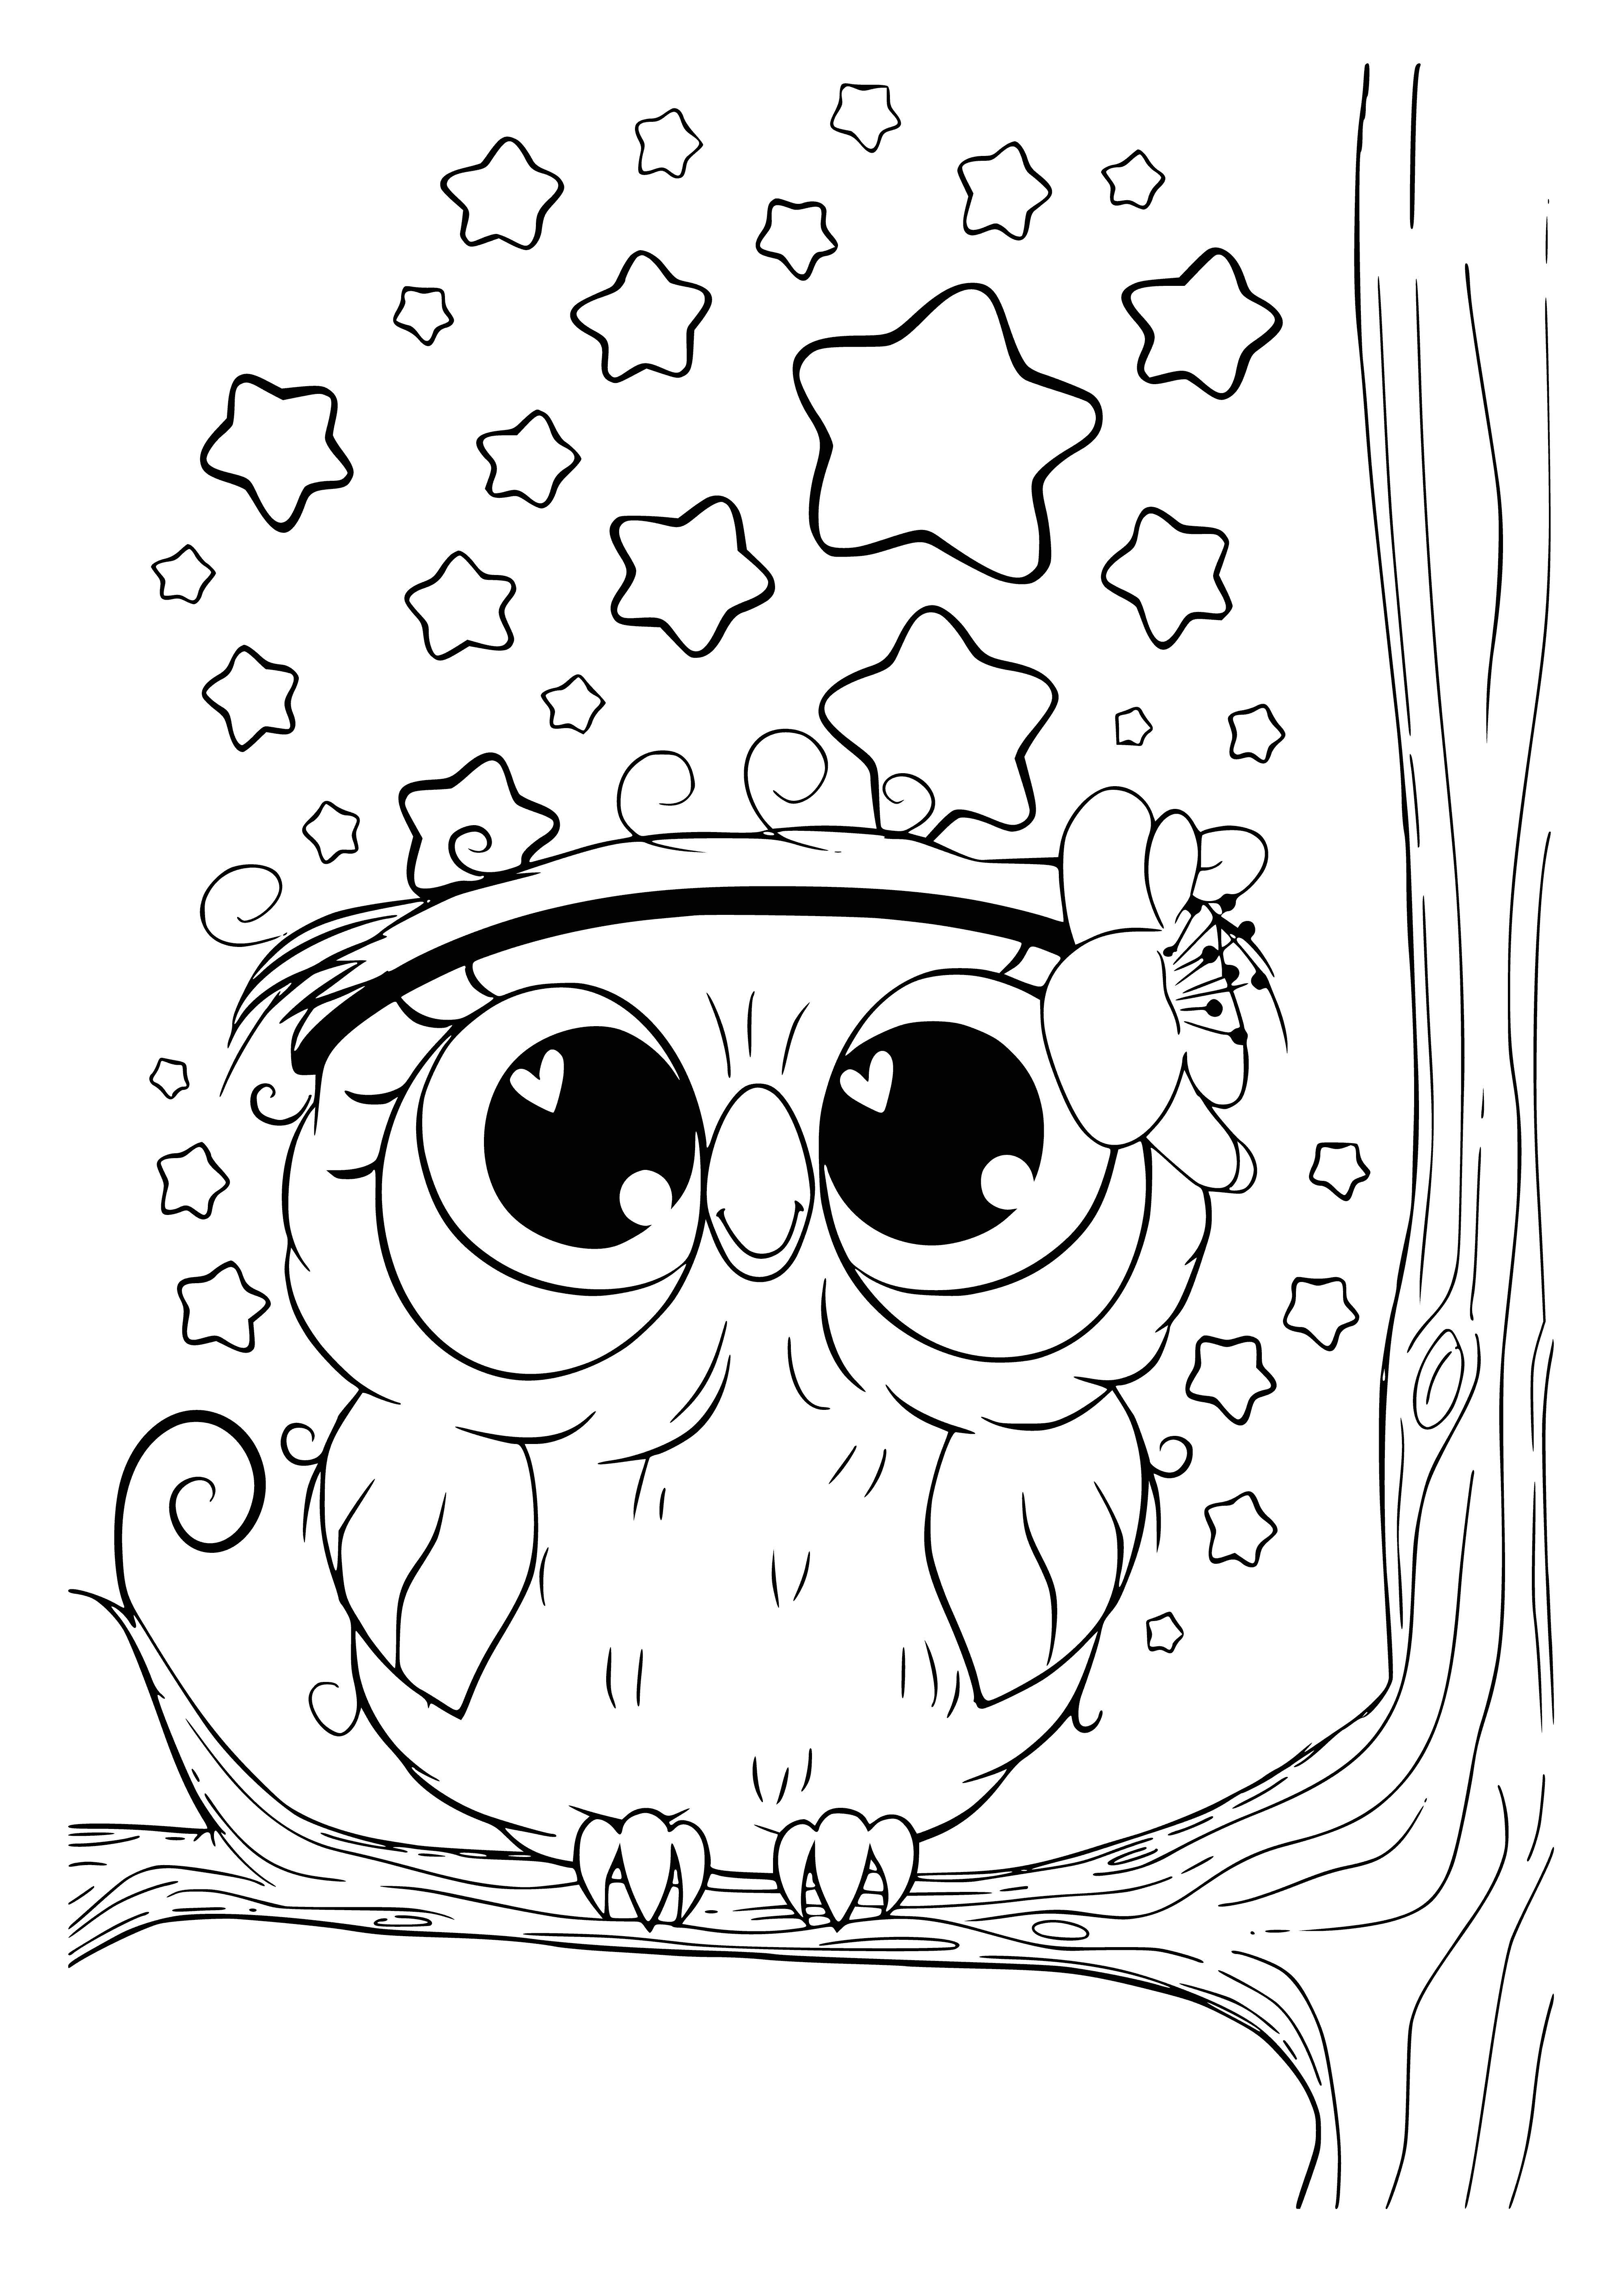 coloring page: A curious owlet sits on a branch, sporting soft browns and a creamy belly, big dark eyes, and a small brown beak.